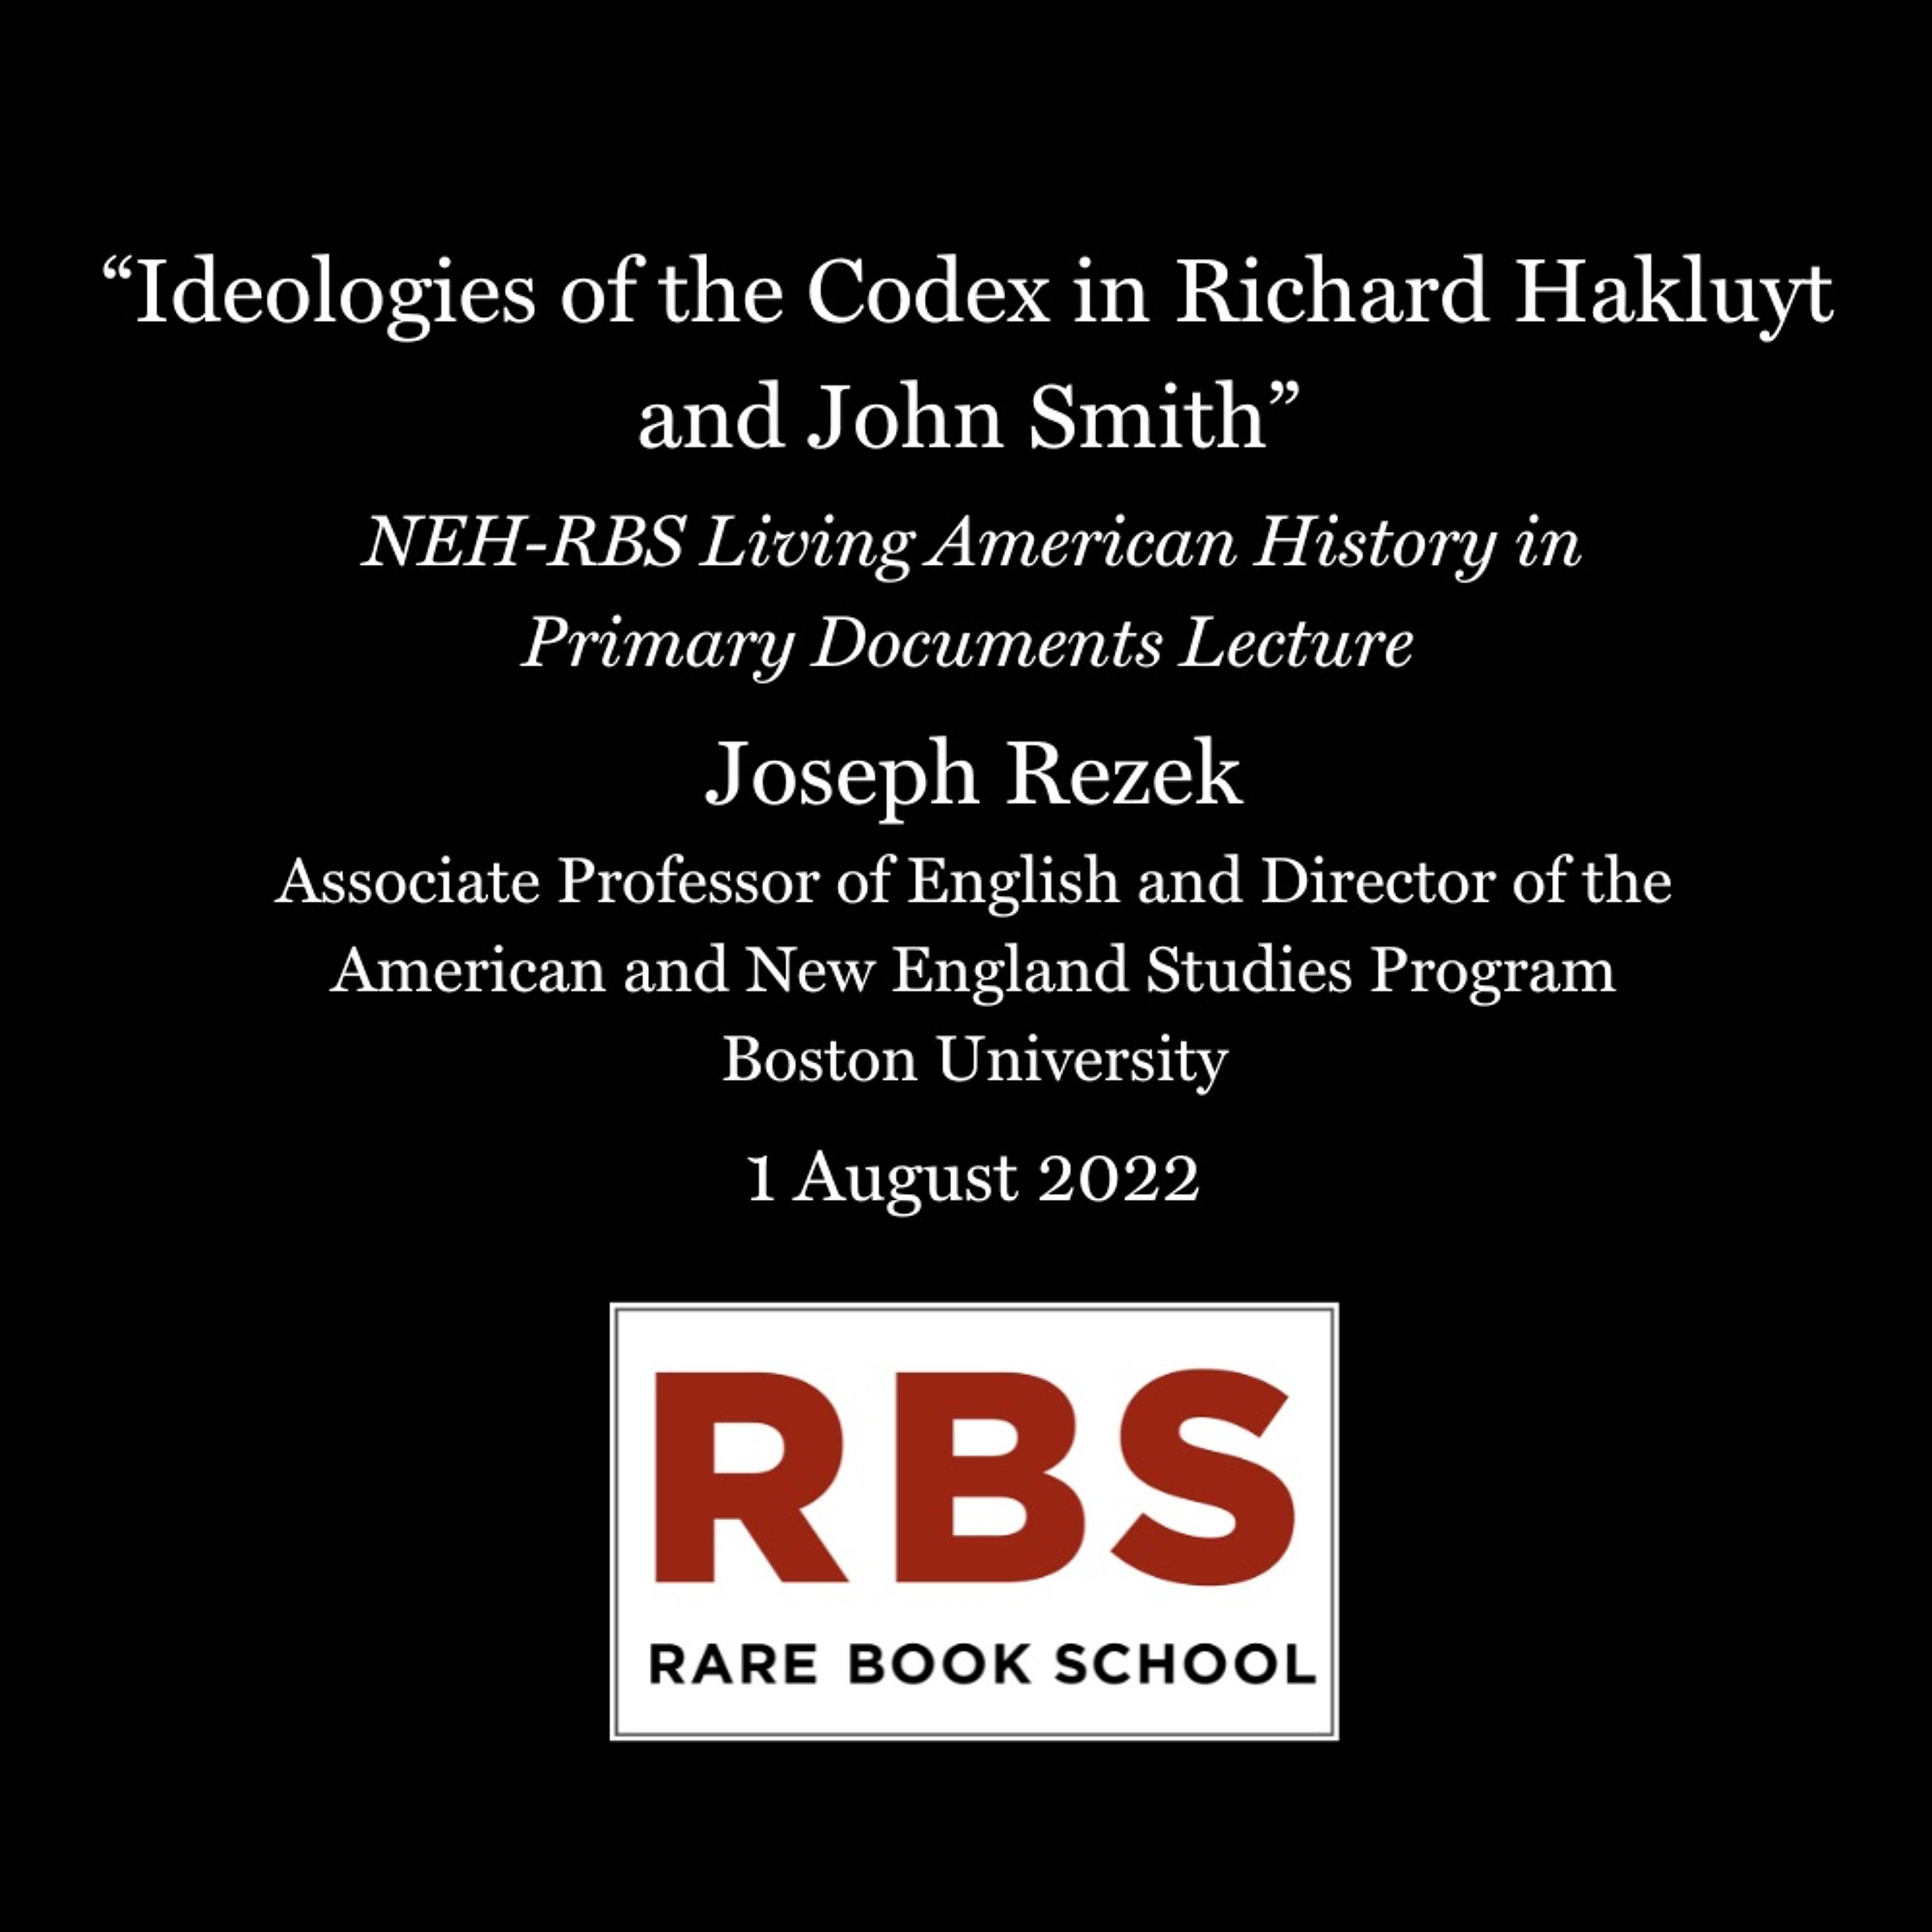 Rezek, Joseph - ”Ideologies of the Codex in Hakluyt and Smith” - NEH-SHARP Lecture, 1 Aug 2022